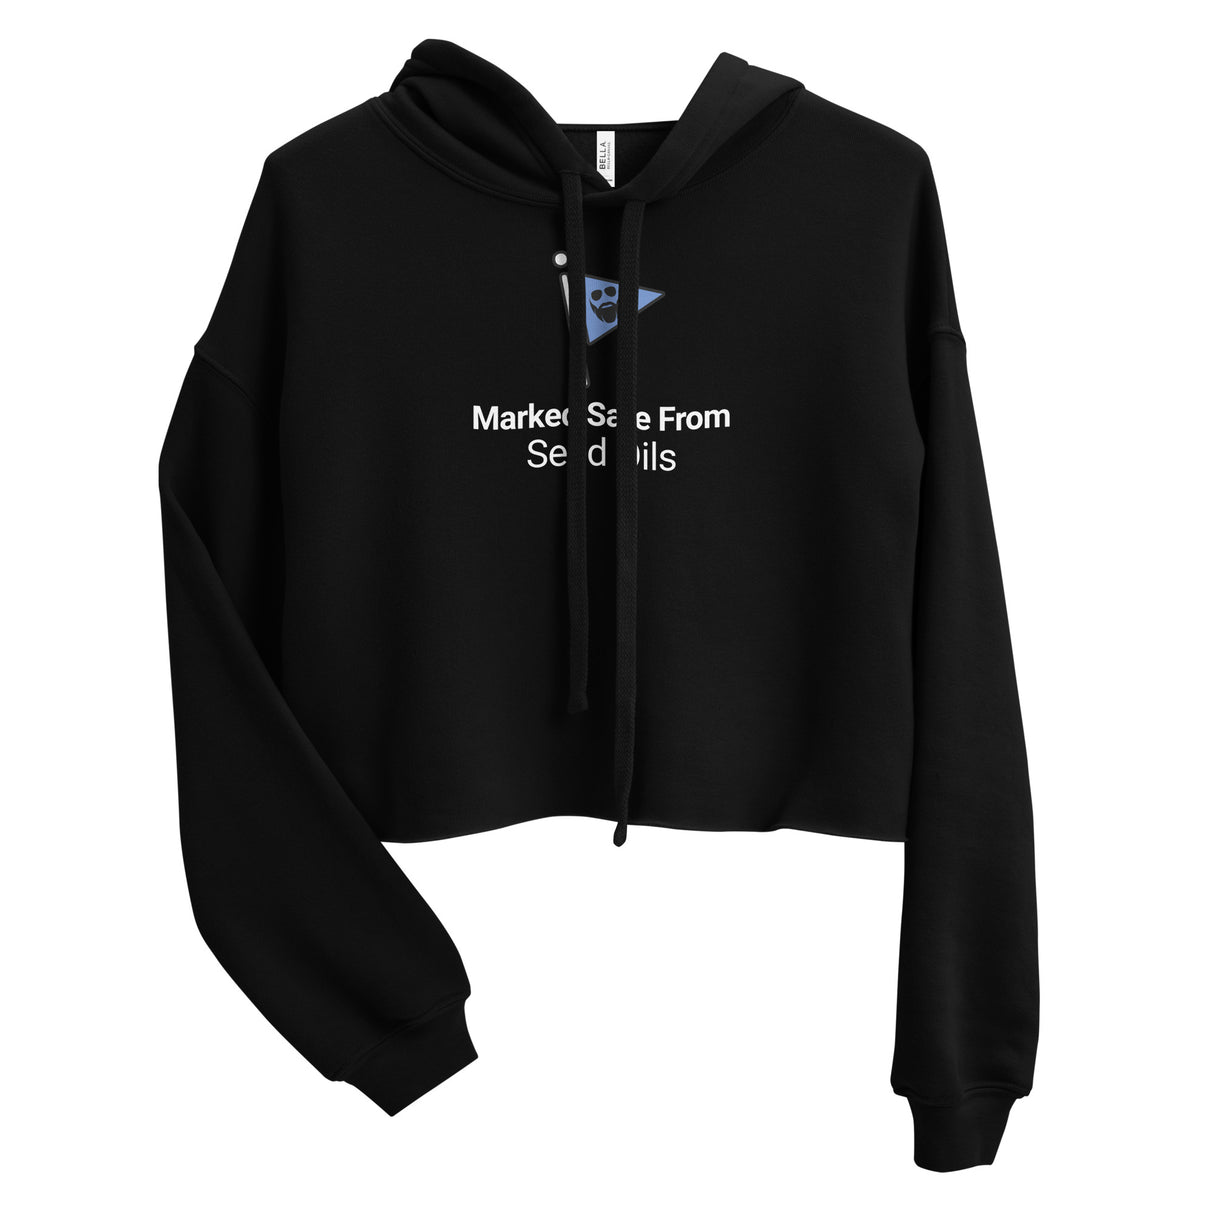 Marked Safe From Seed Oils Crop Hoodie